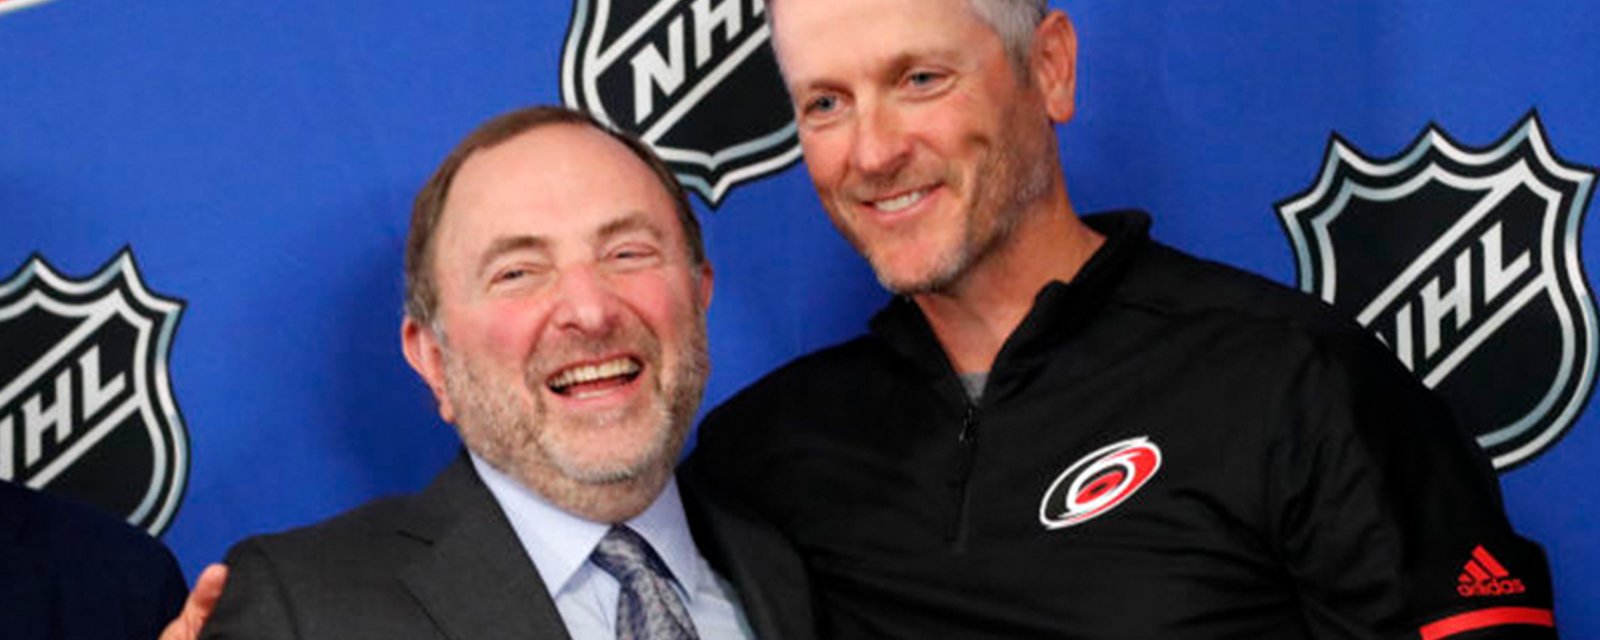 Hurricanes owner Tom Dundon lays off staff with just two days notice 